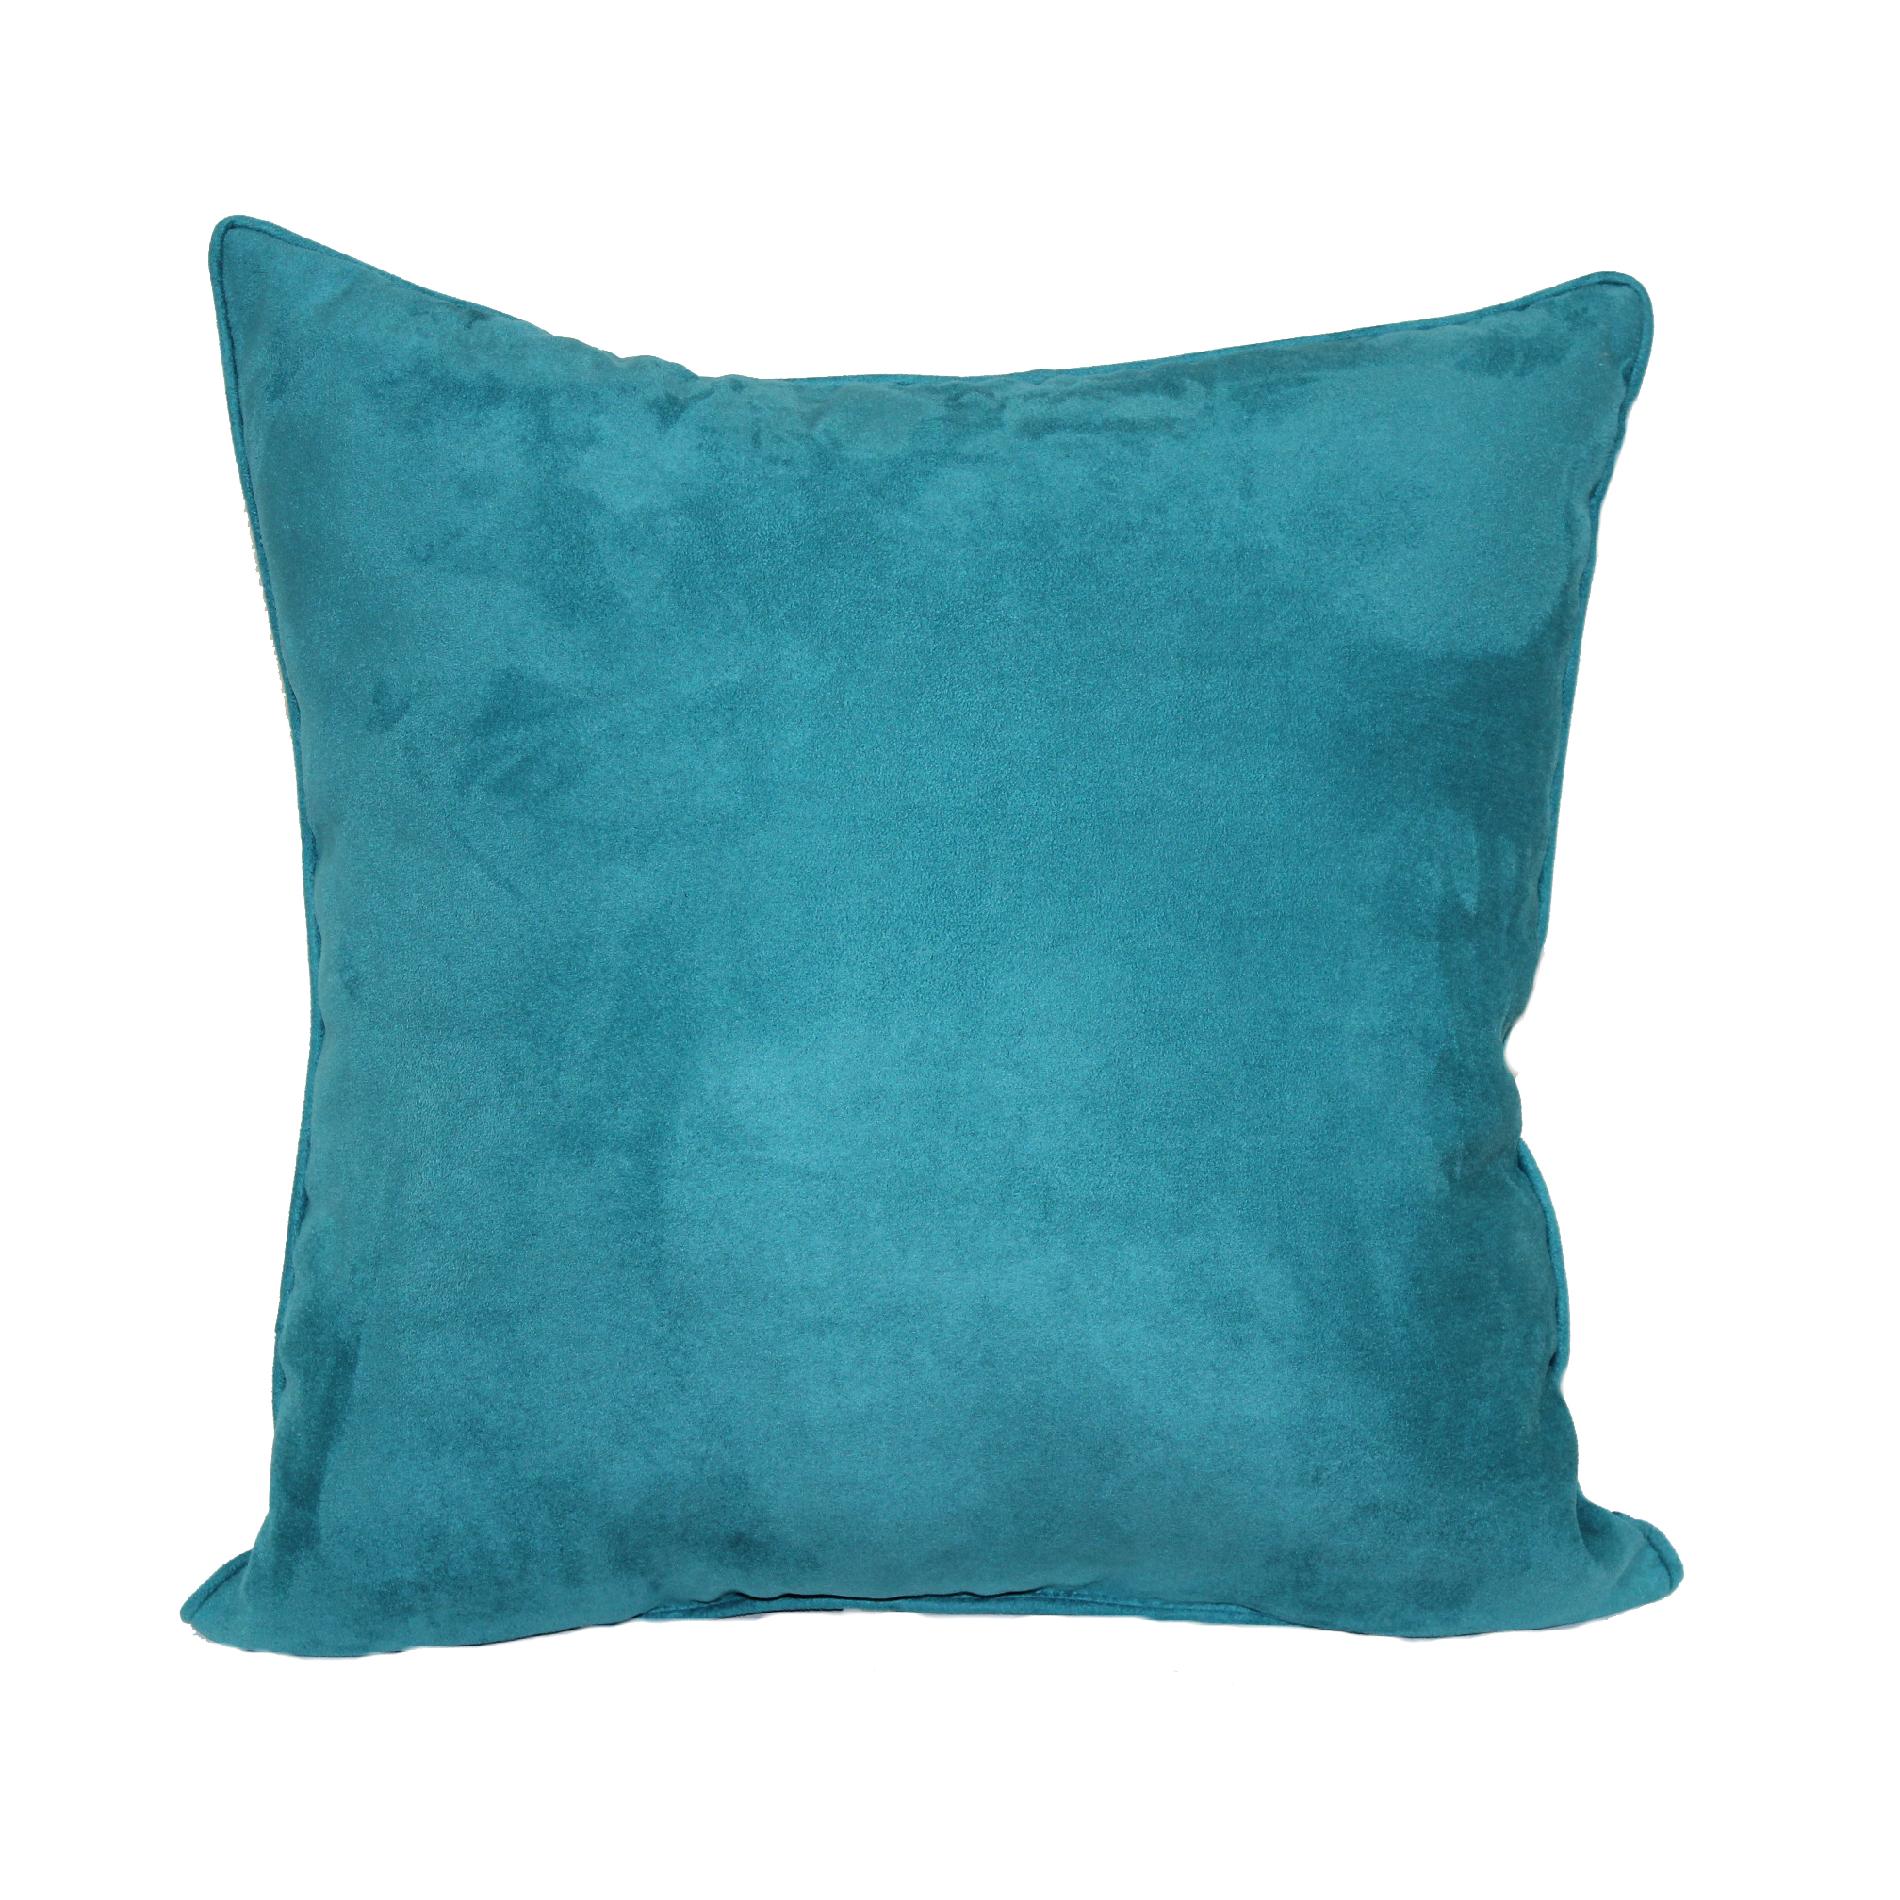 Solid Faux Suede Decorative Pillow - Teal